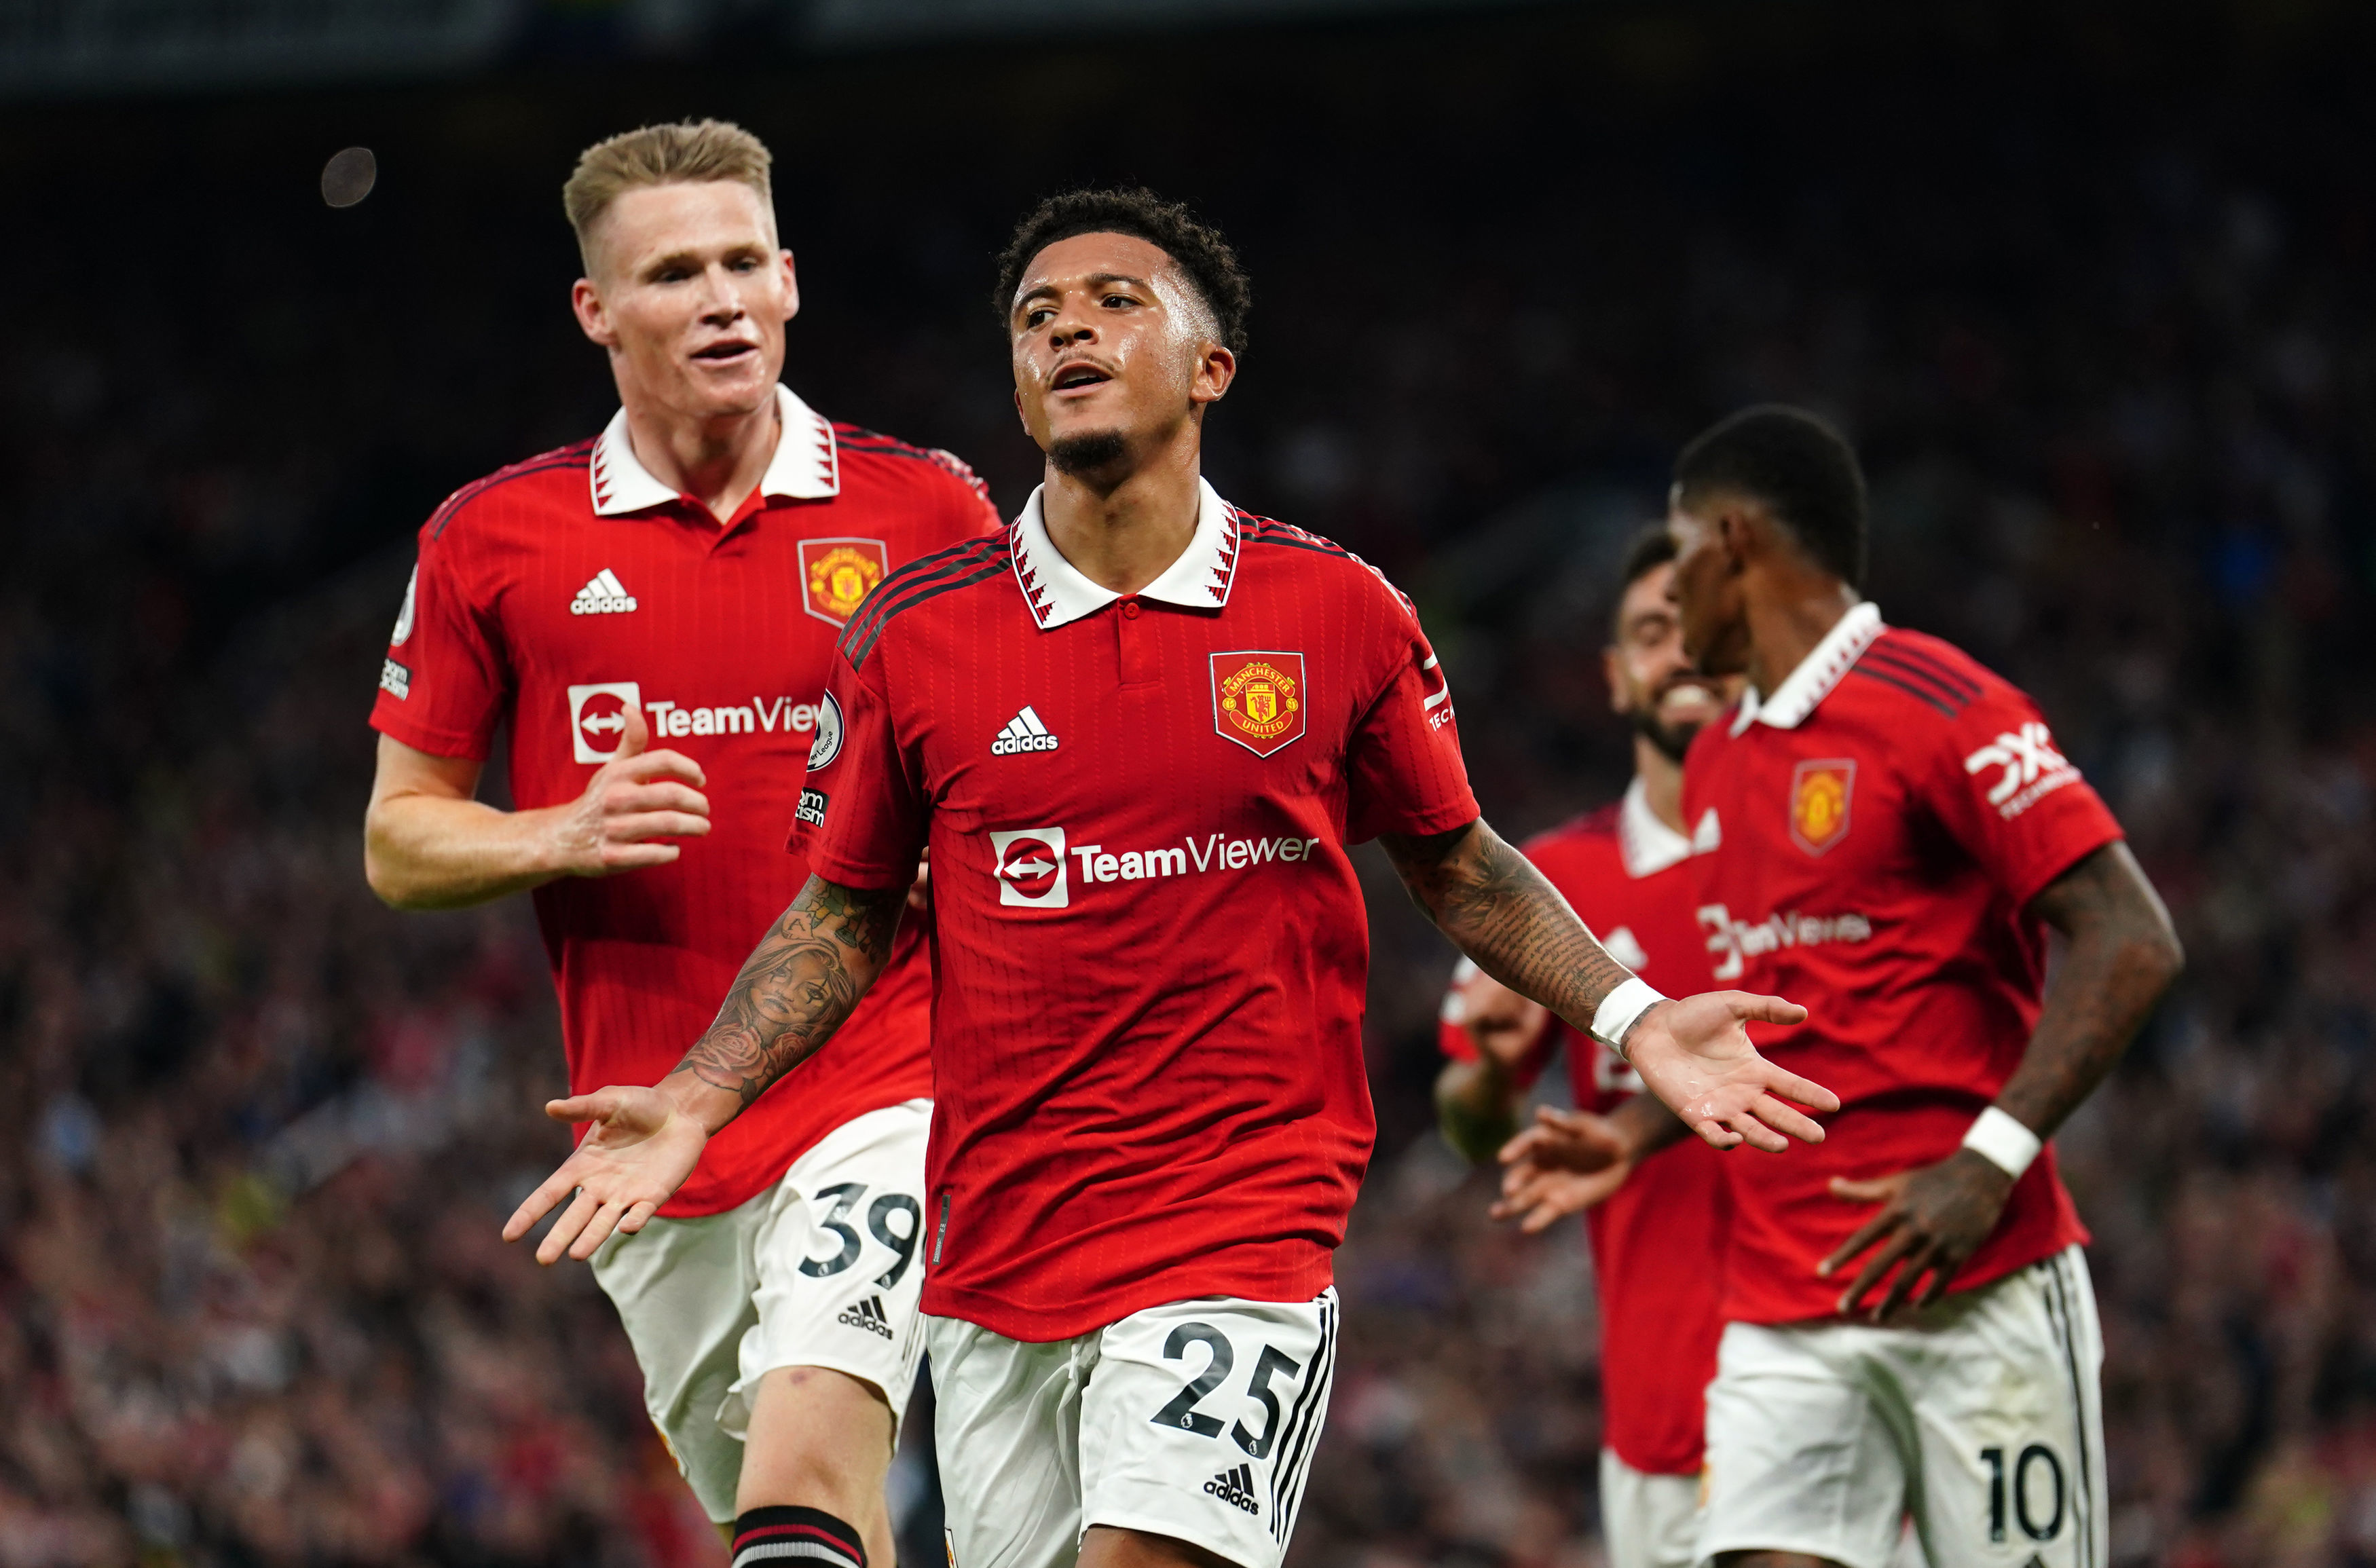 WATCH | Jadon Sancho scores ice-cold goal against Liverpool to put Manchester United ahead